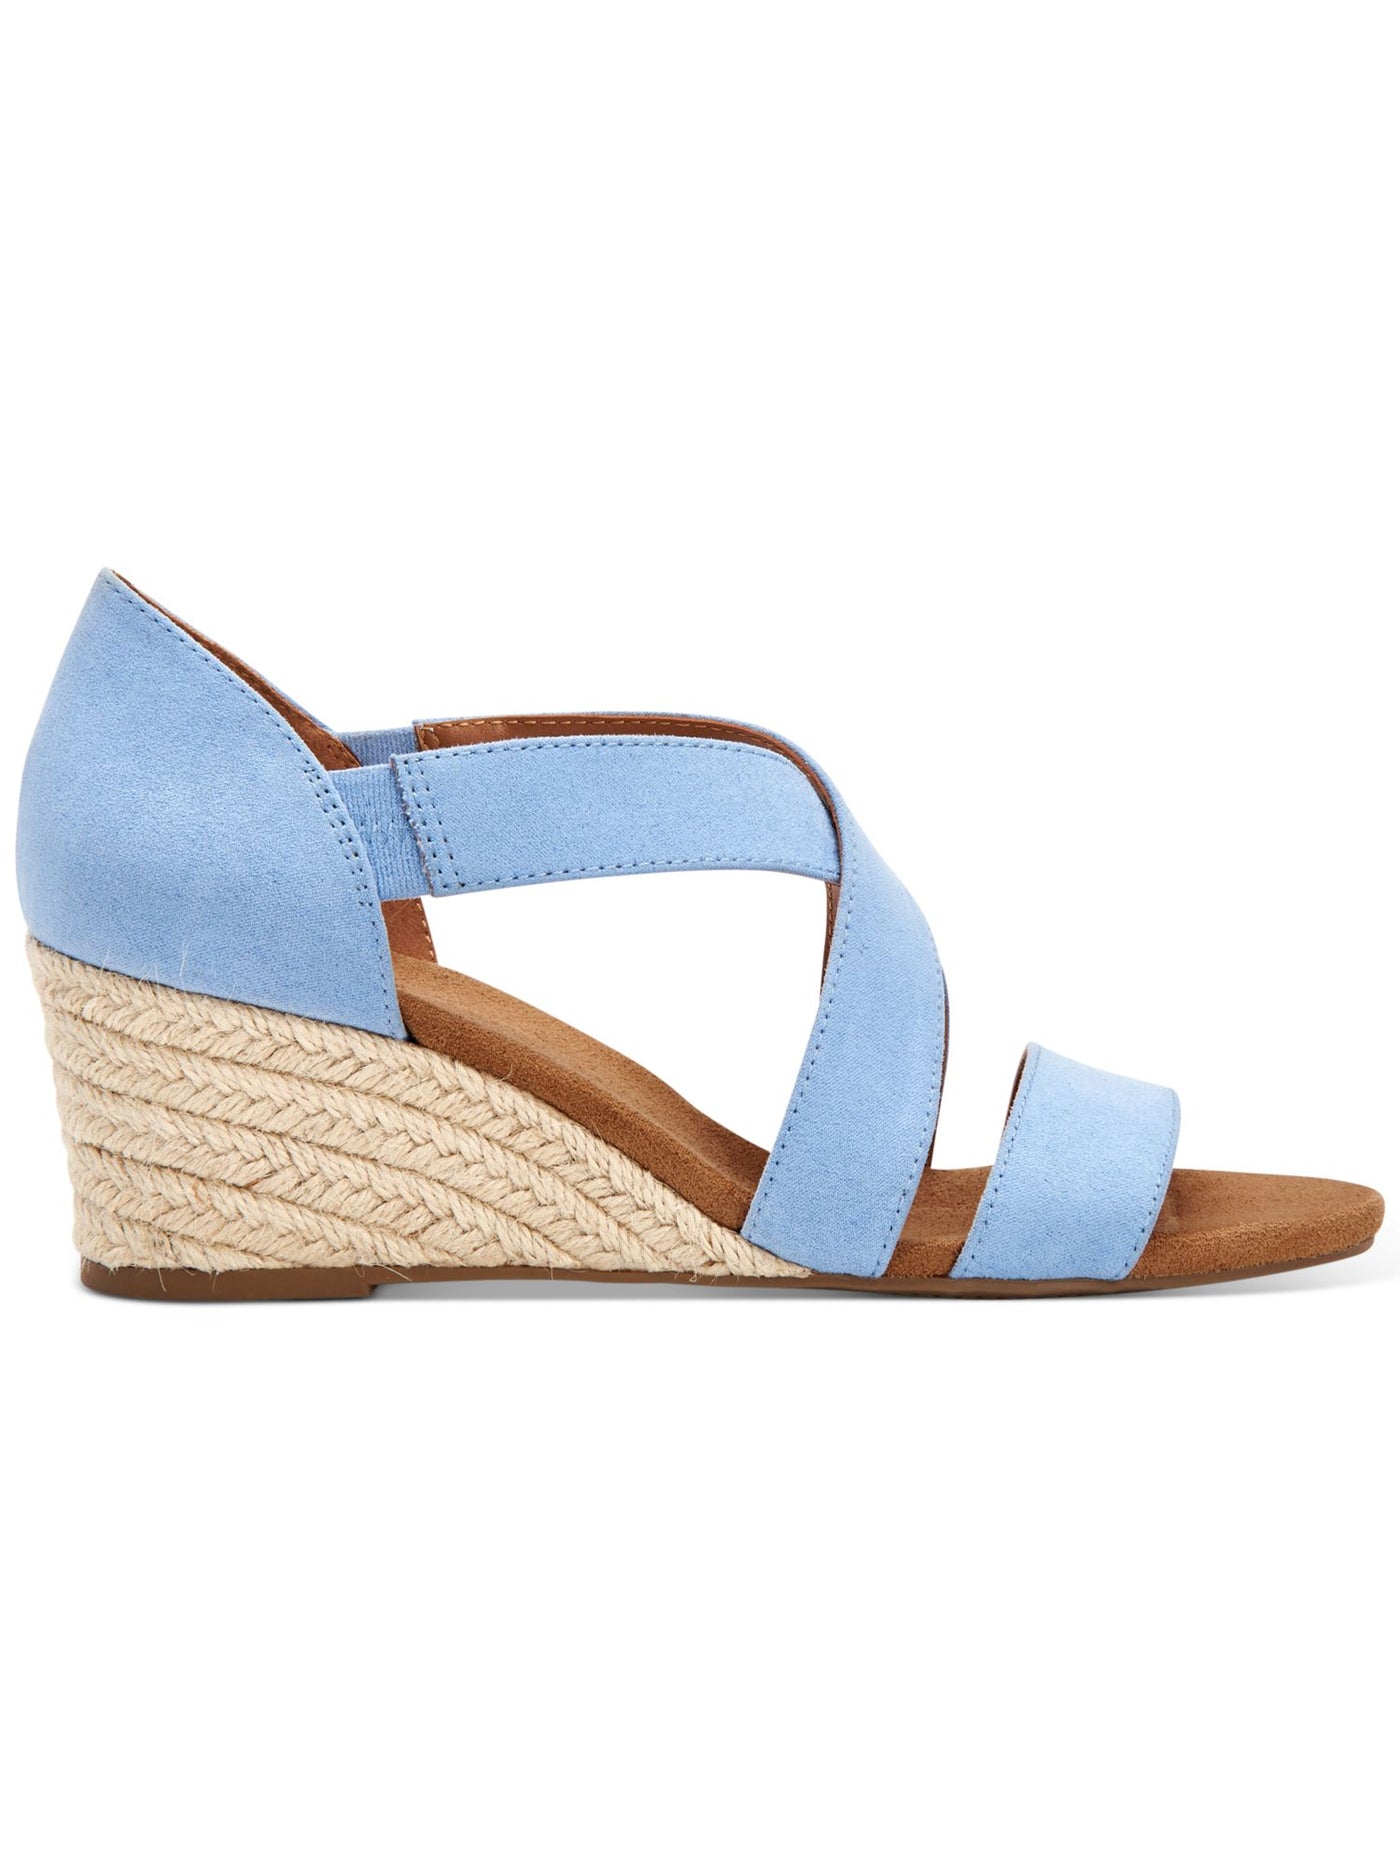 STYLE & COMPANY Womens Light Blue Padded Strappy Zaddie Almond Toe Wedge Slip On Espadrille Shoes 8.5 M